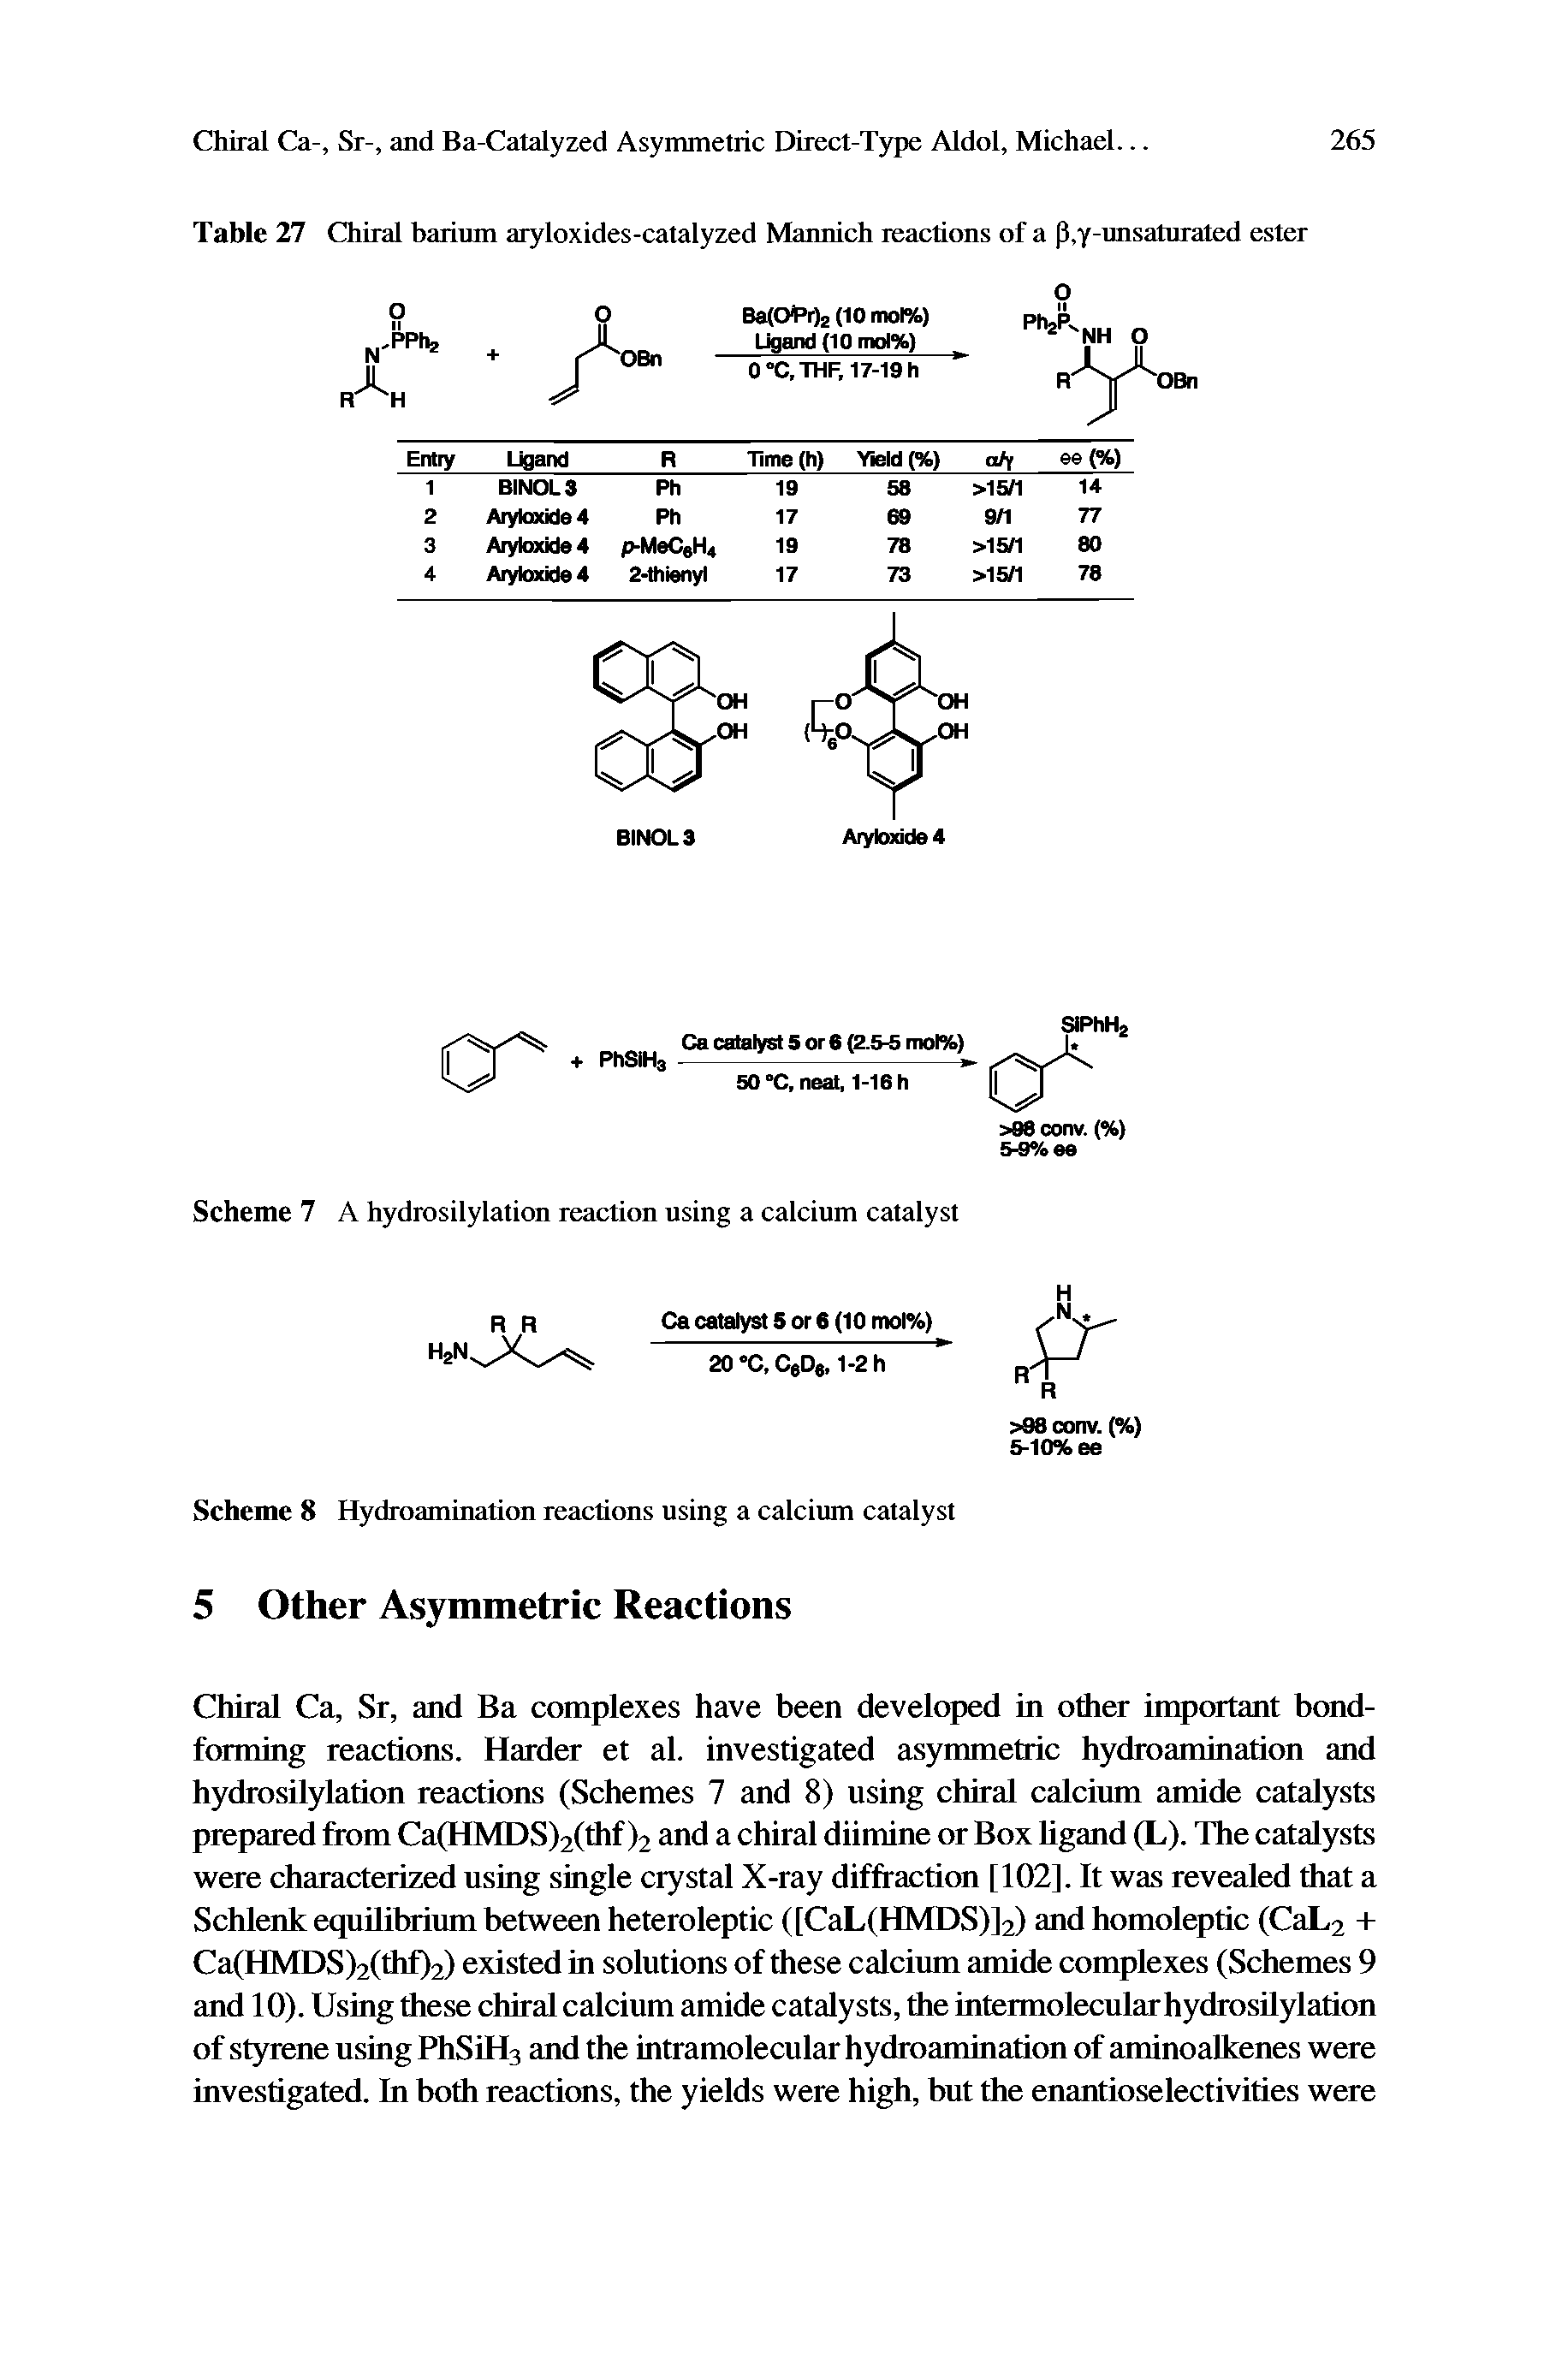 Table 27 Chiral barium aryloxides-catalyzed Mannich reactions of a p.y-unsaturated ester...